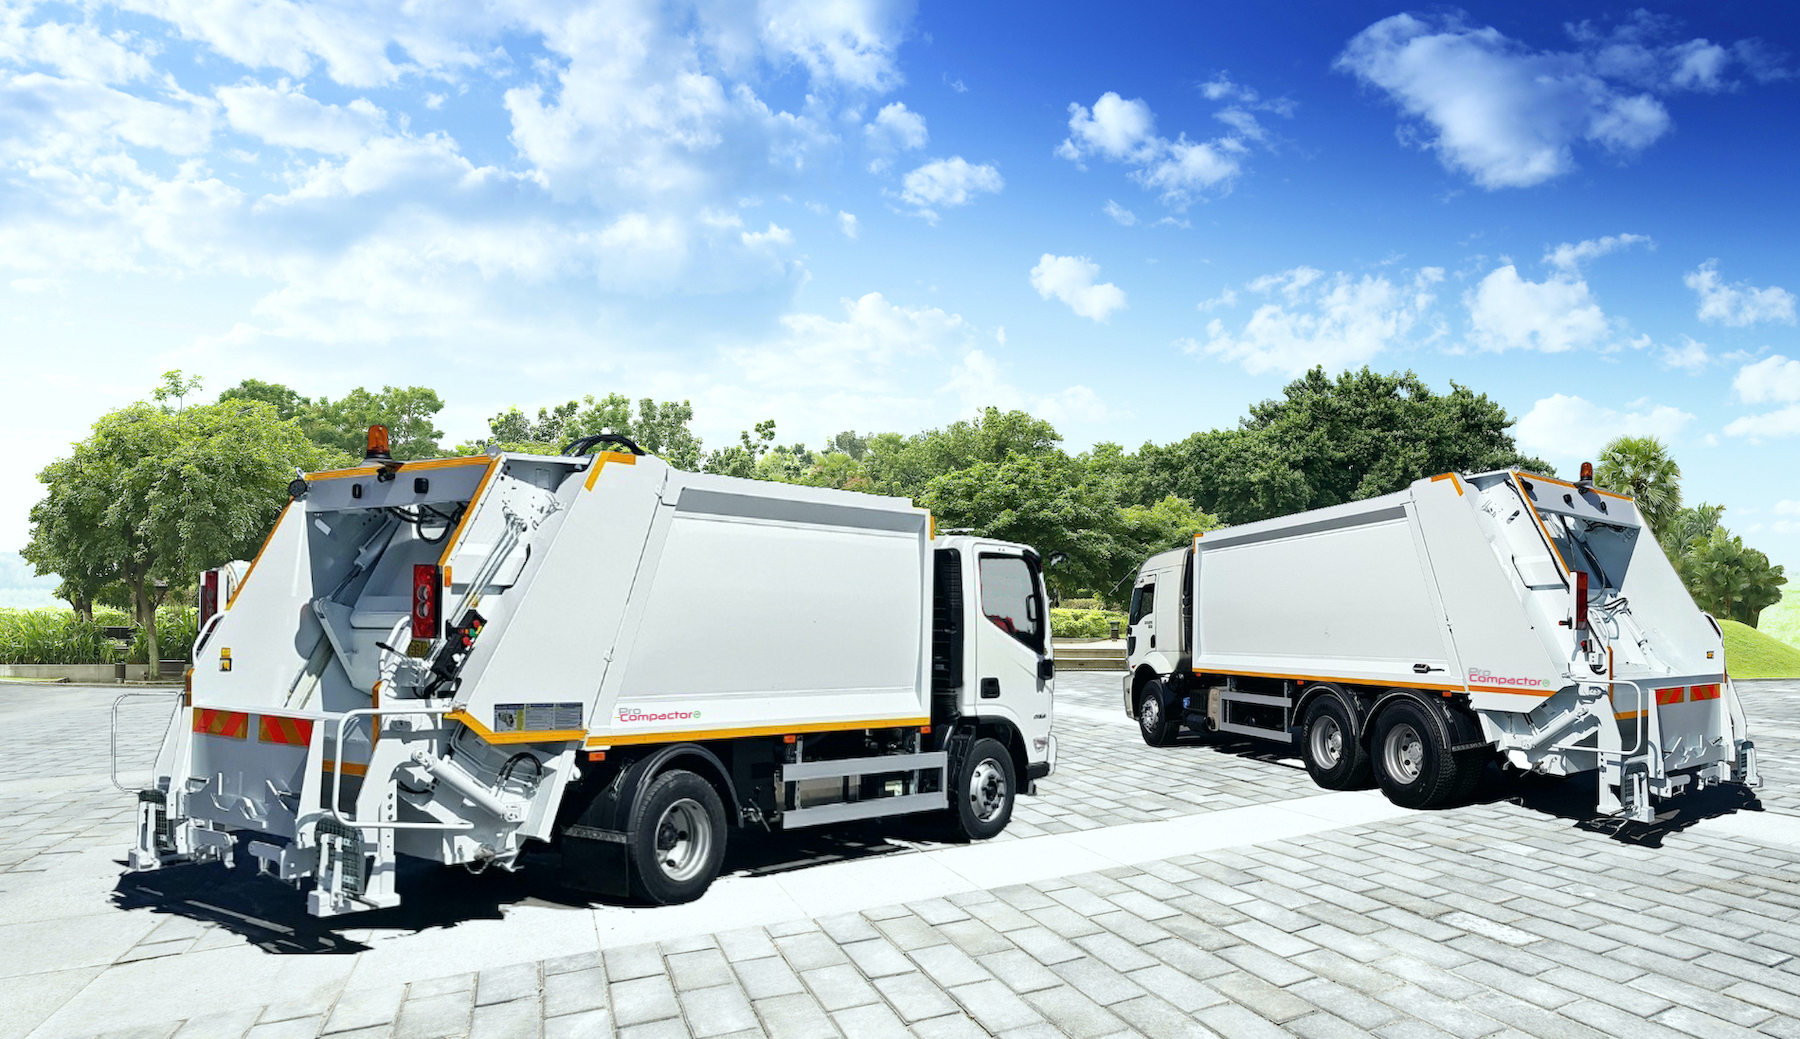 The main function of a Refuse Truck is to do the collection of all kinds of waste: garbage,  solid waste, and recycling objects and having them transported to bigger facilities for waste treatments. Garbage trucks are mostly used by municipal duties and private companies.